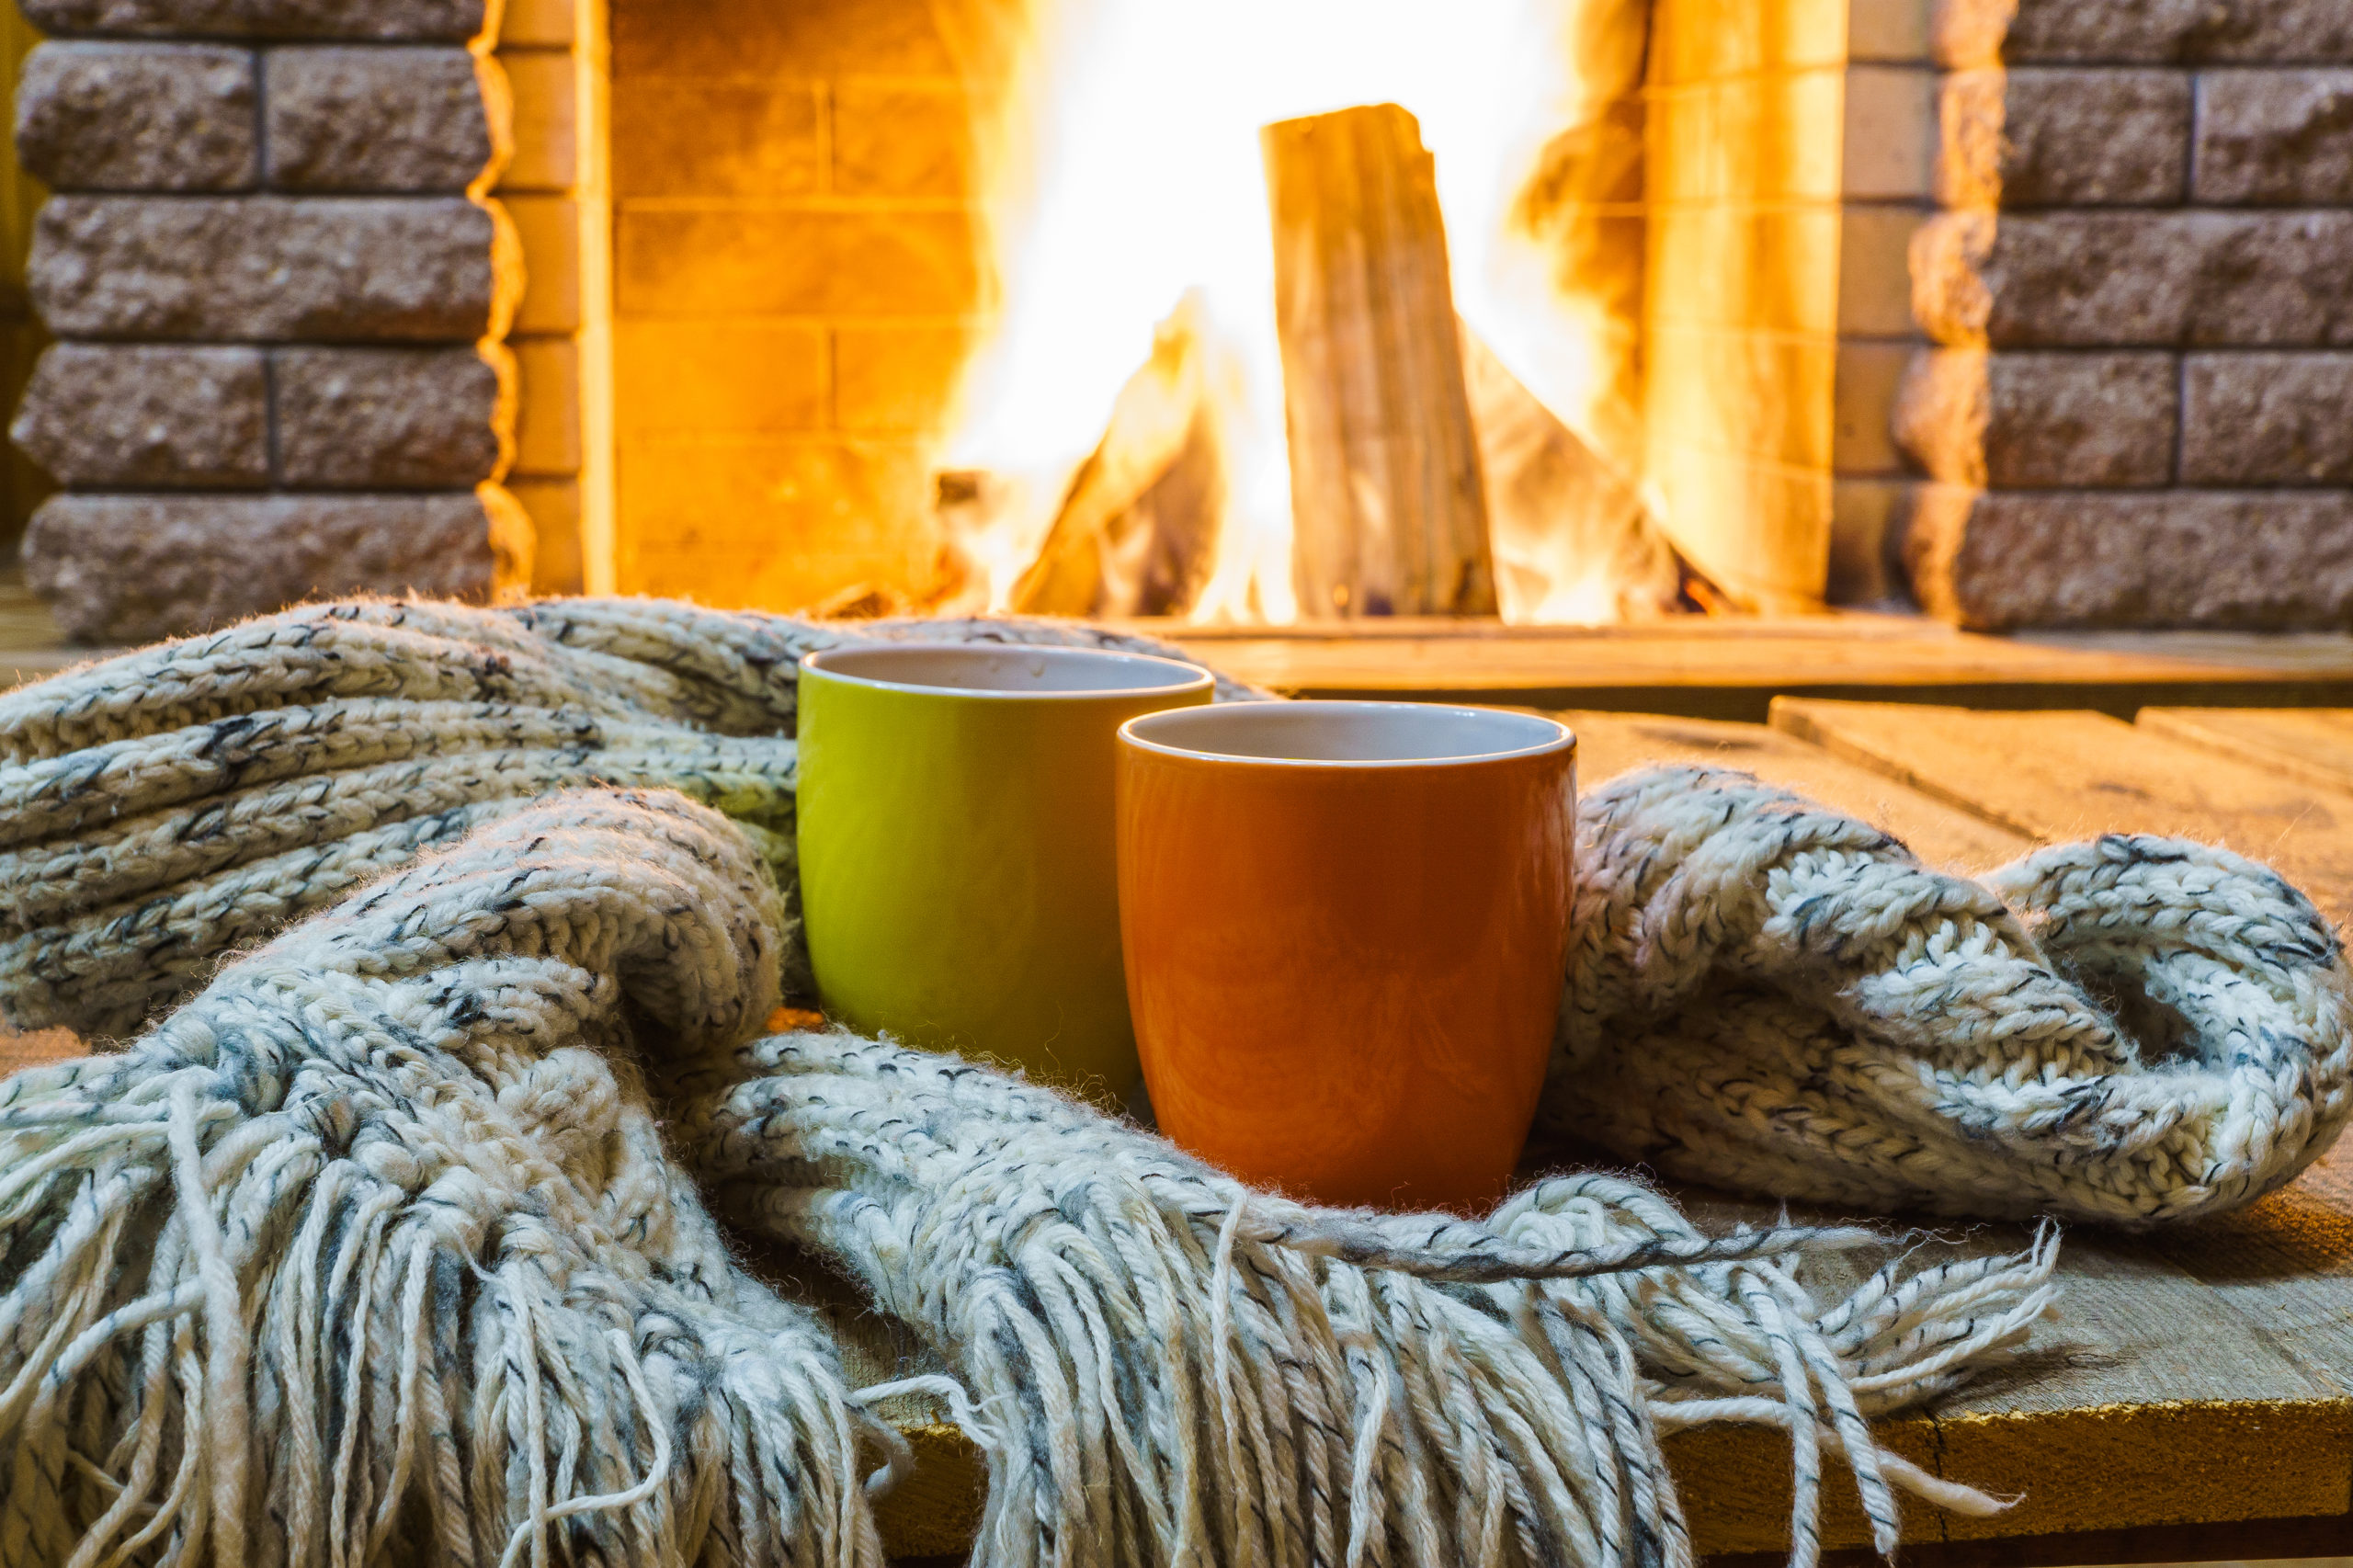 Mugs  for tea or coffee,  wool things near cozy fireplace, in country house, winter vacation, horizontal.